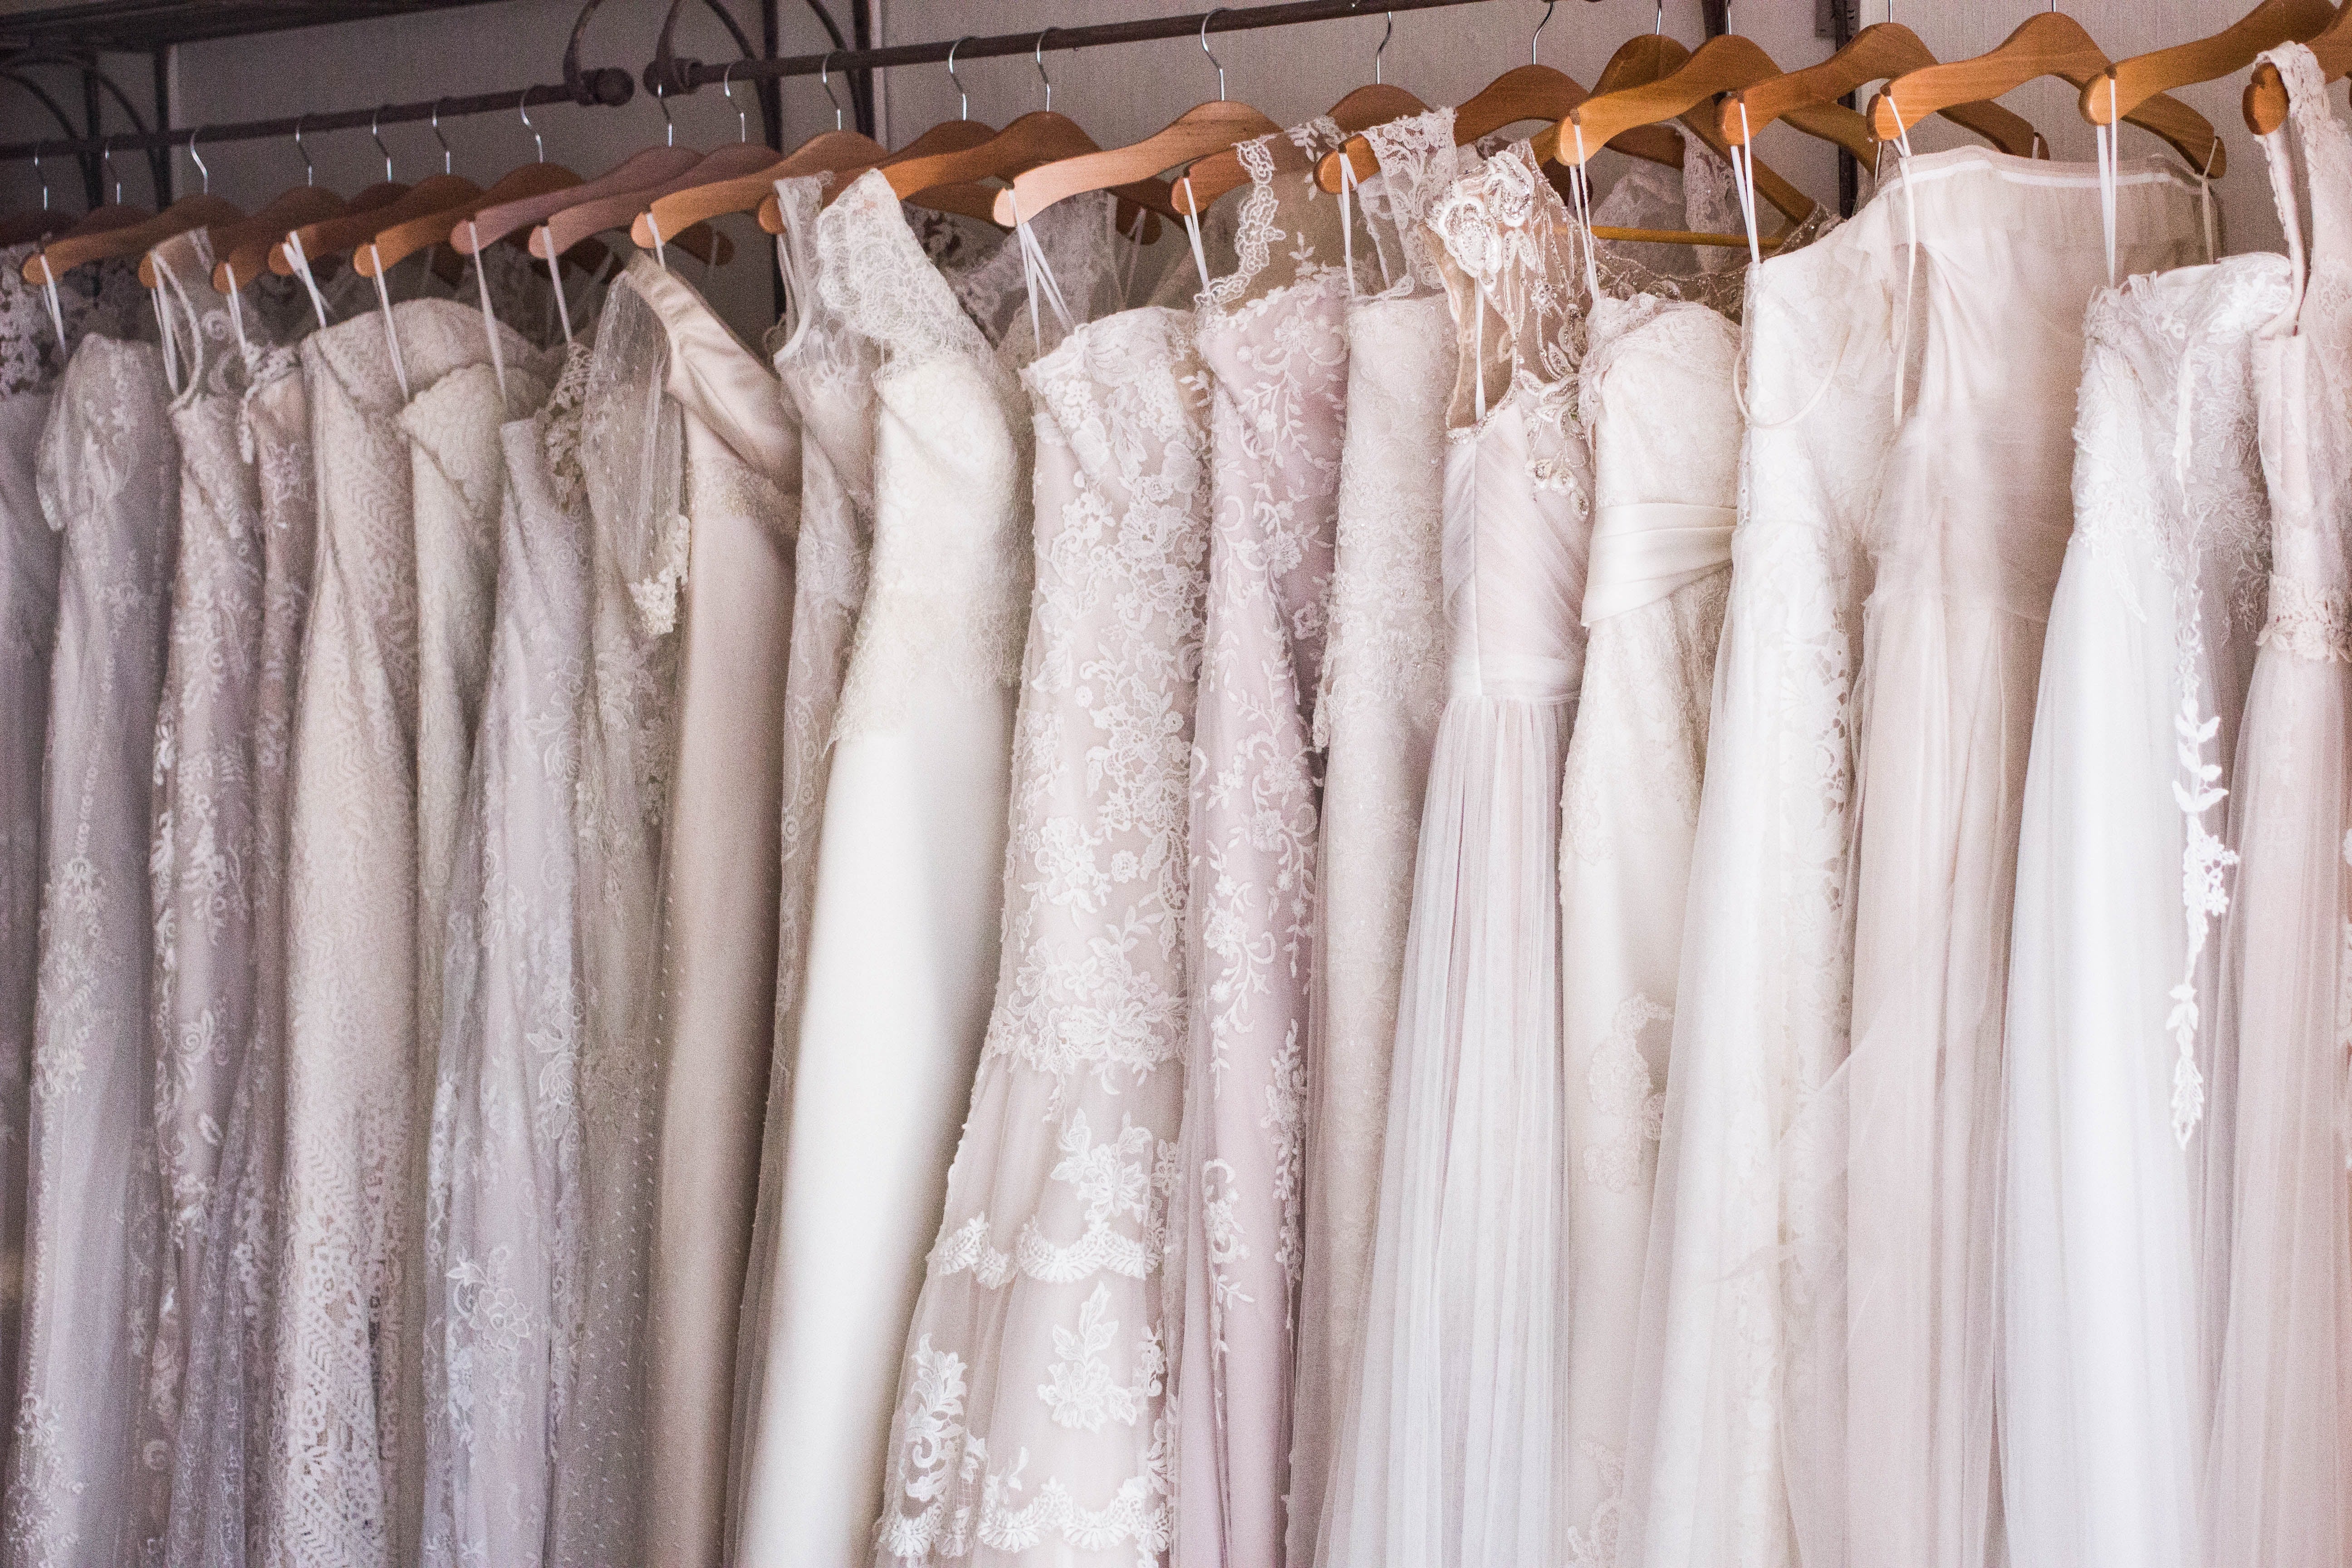 Things to Know About Wedding Dress Preservation & Cleaning